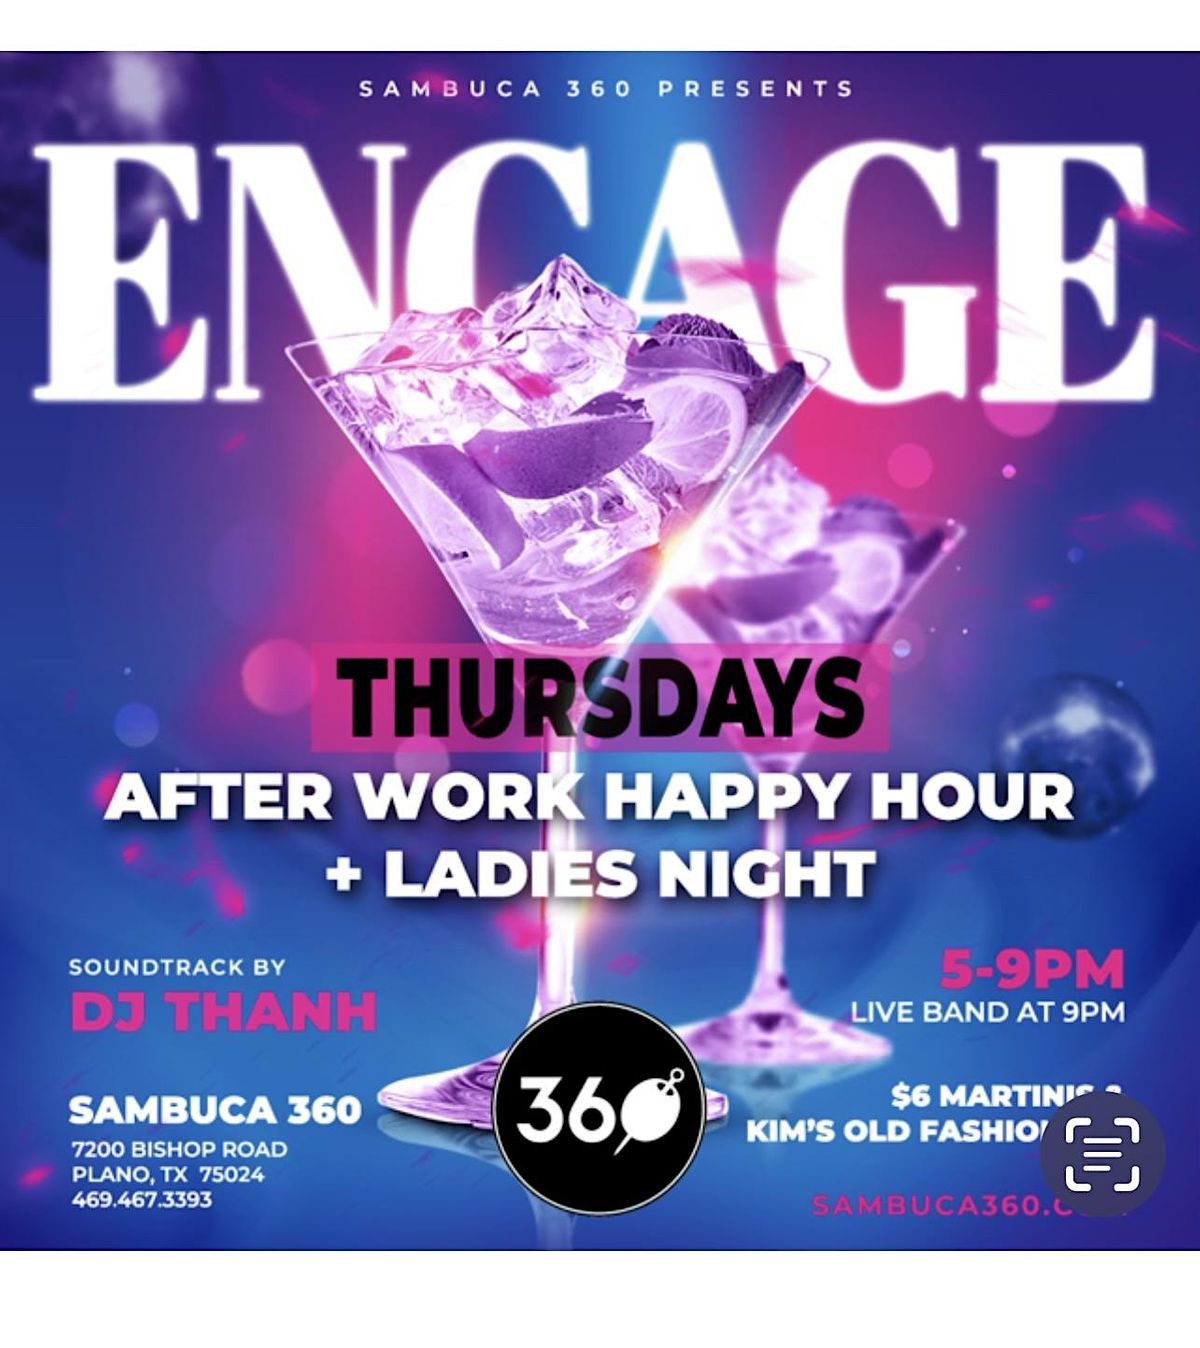 ENGAGE AFTER WORK HAPPY HOUR LADIES NIGHT EDITION